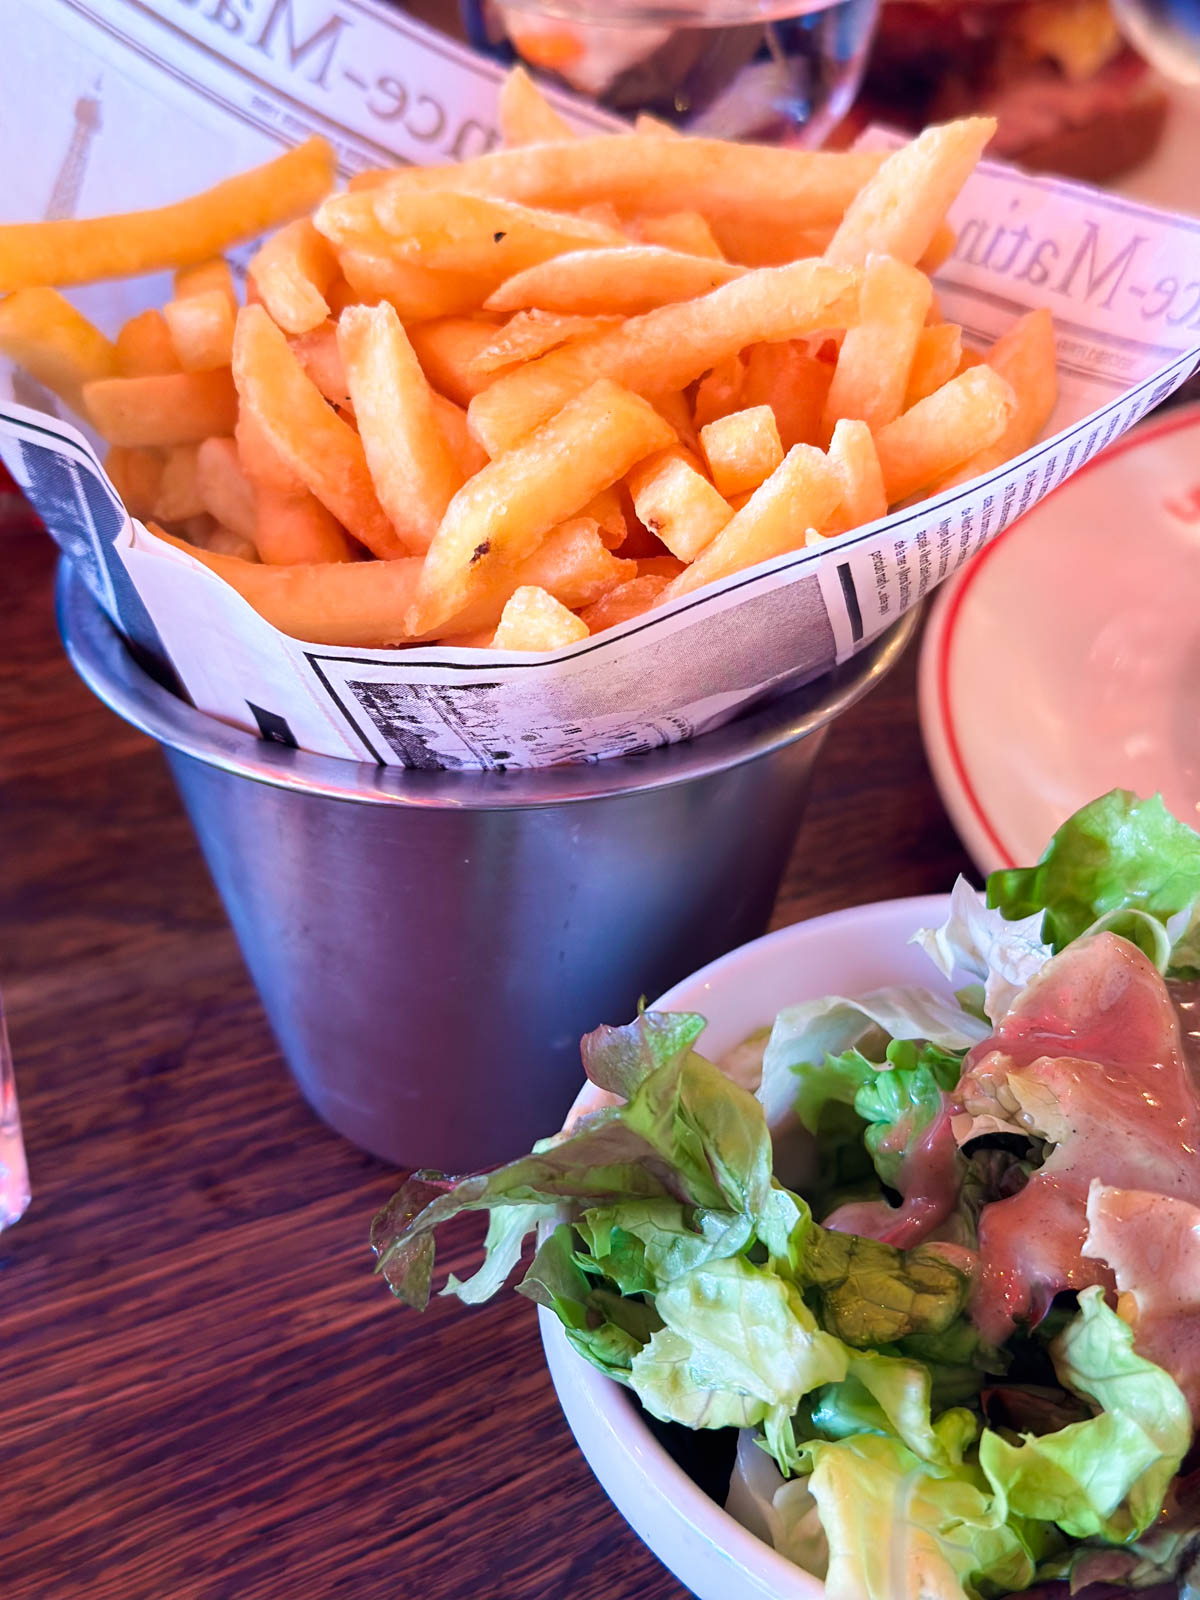 A container of french fries sits next to a small salad.